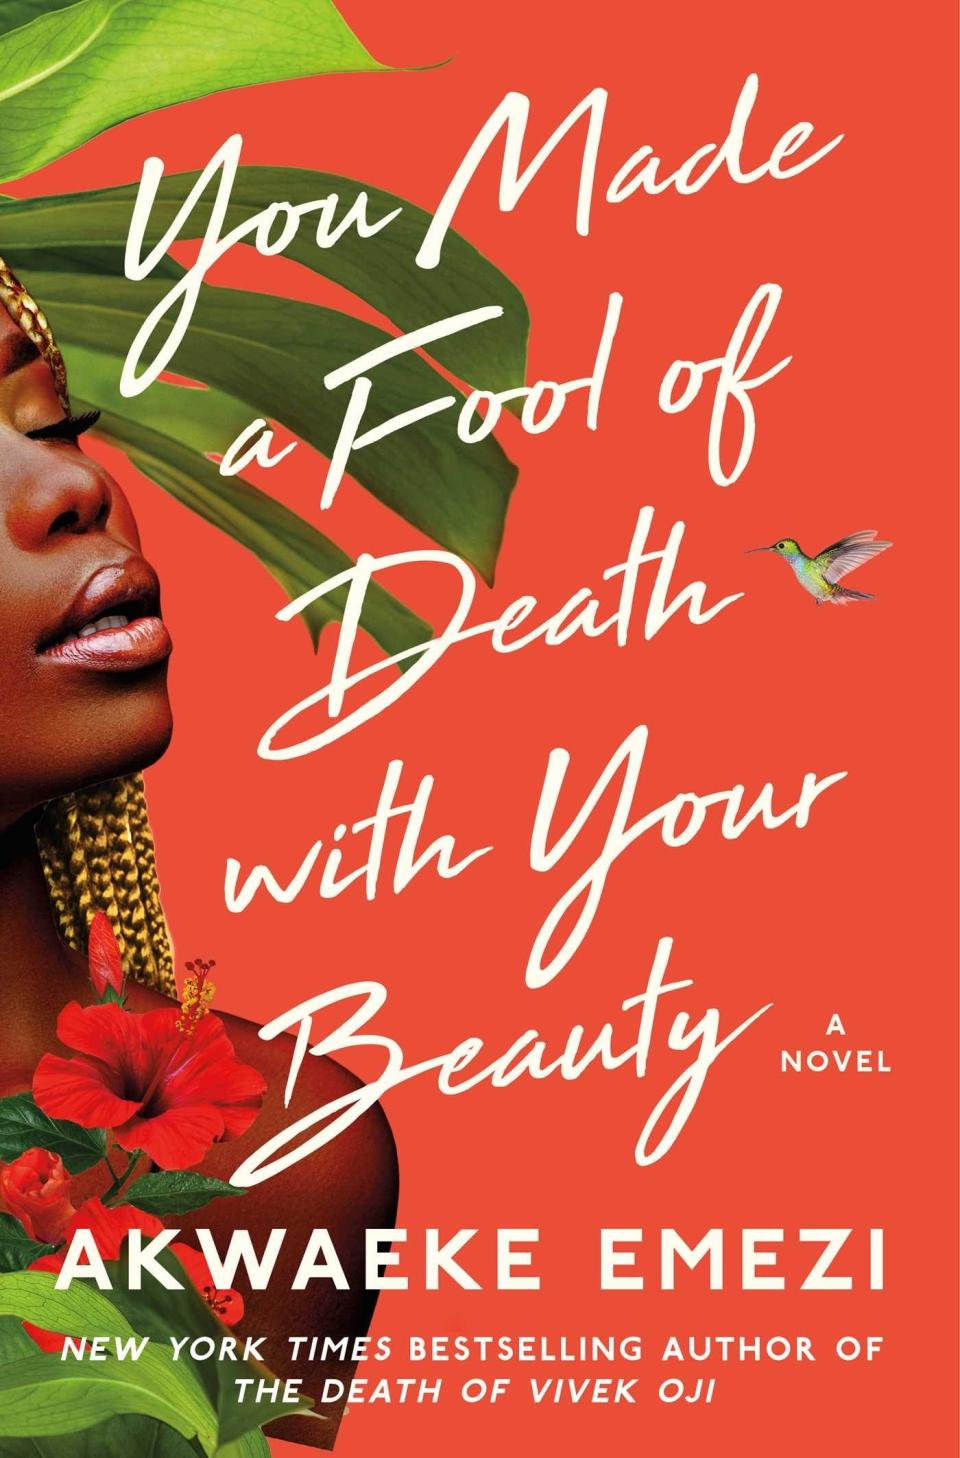 "You Made a Fool of Death with Your Beauty" cover showing a woman closing her eyes